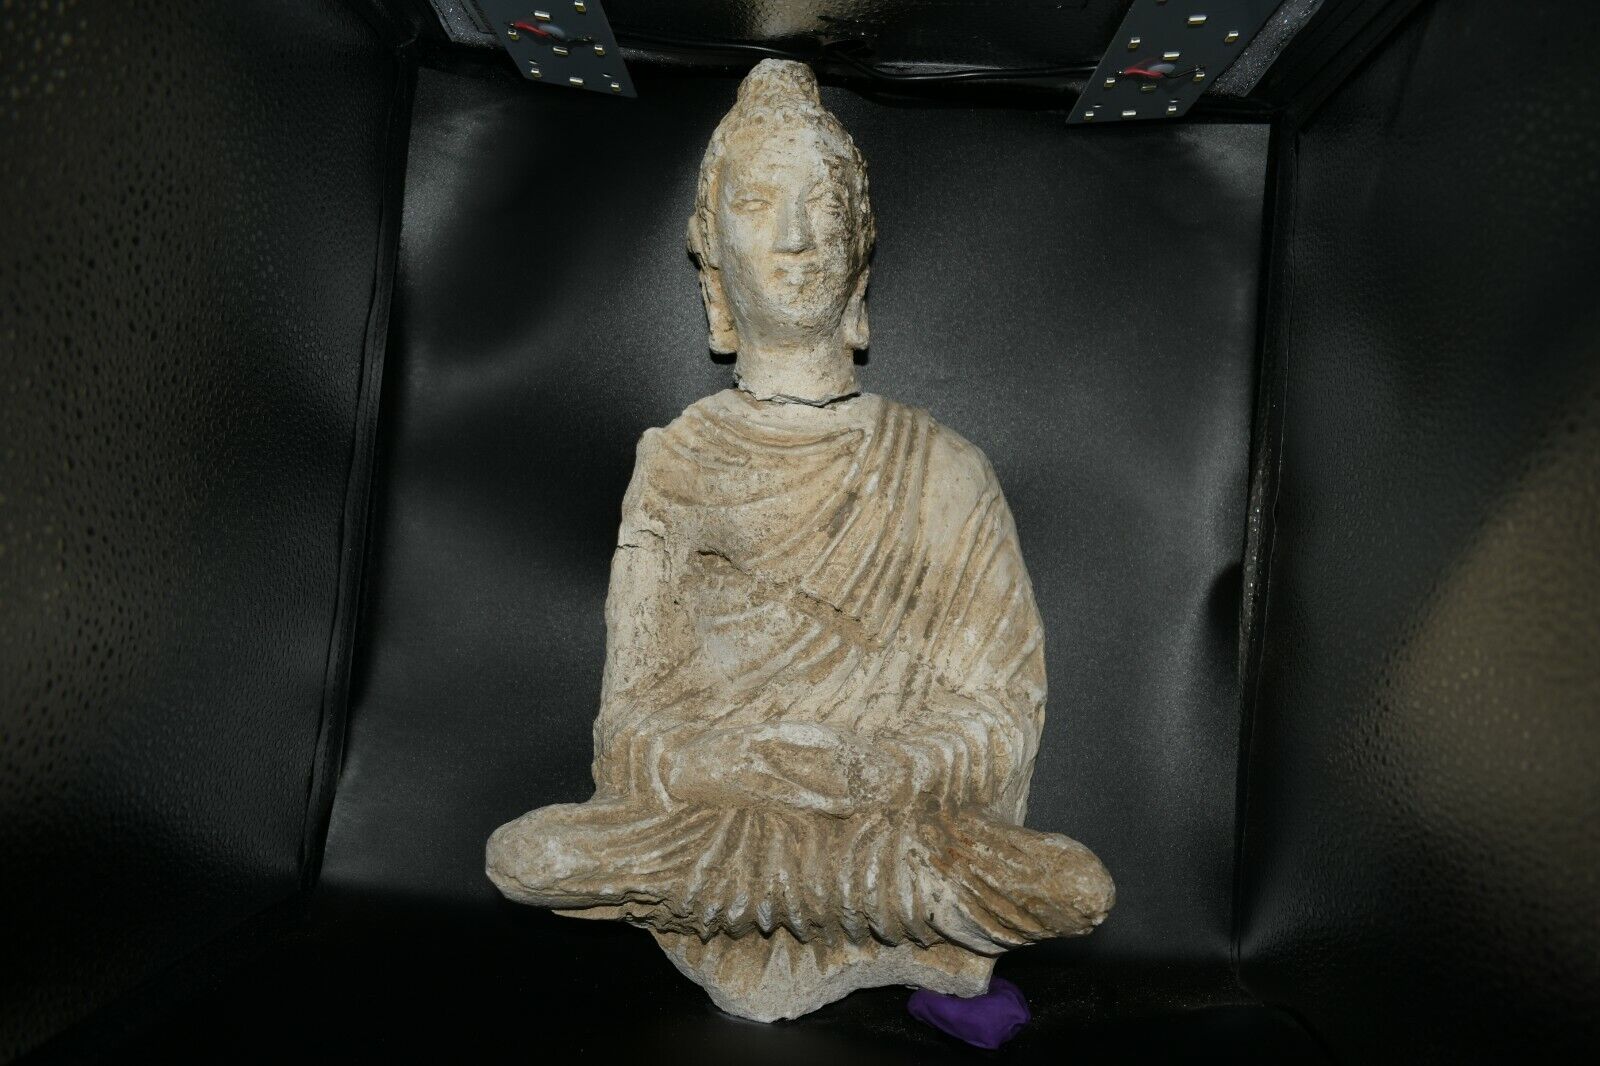 A Very Big Rare Ancient Buddhist Plaster Sculpture Idol 100% Authentic Old   